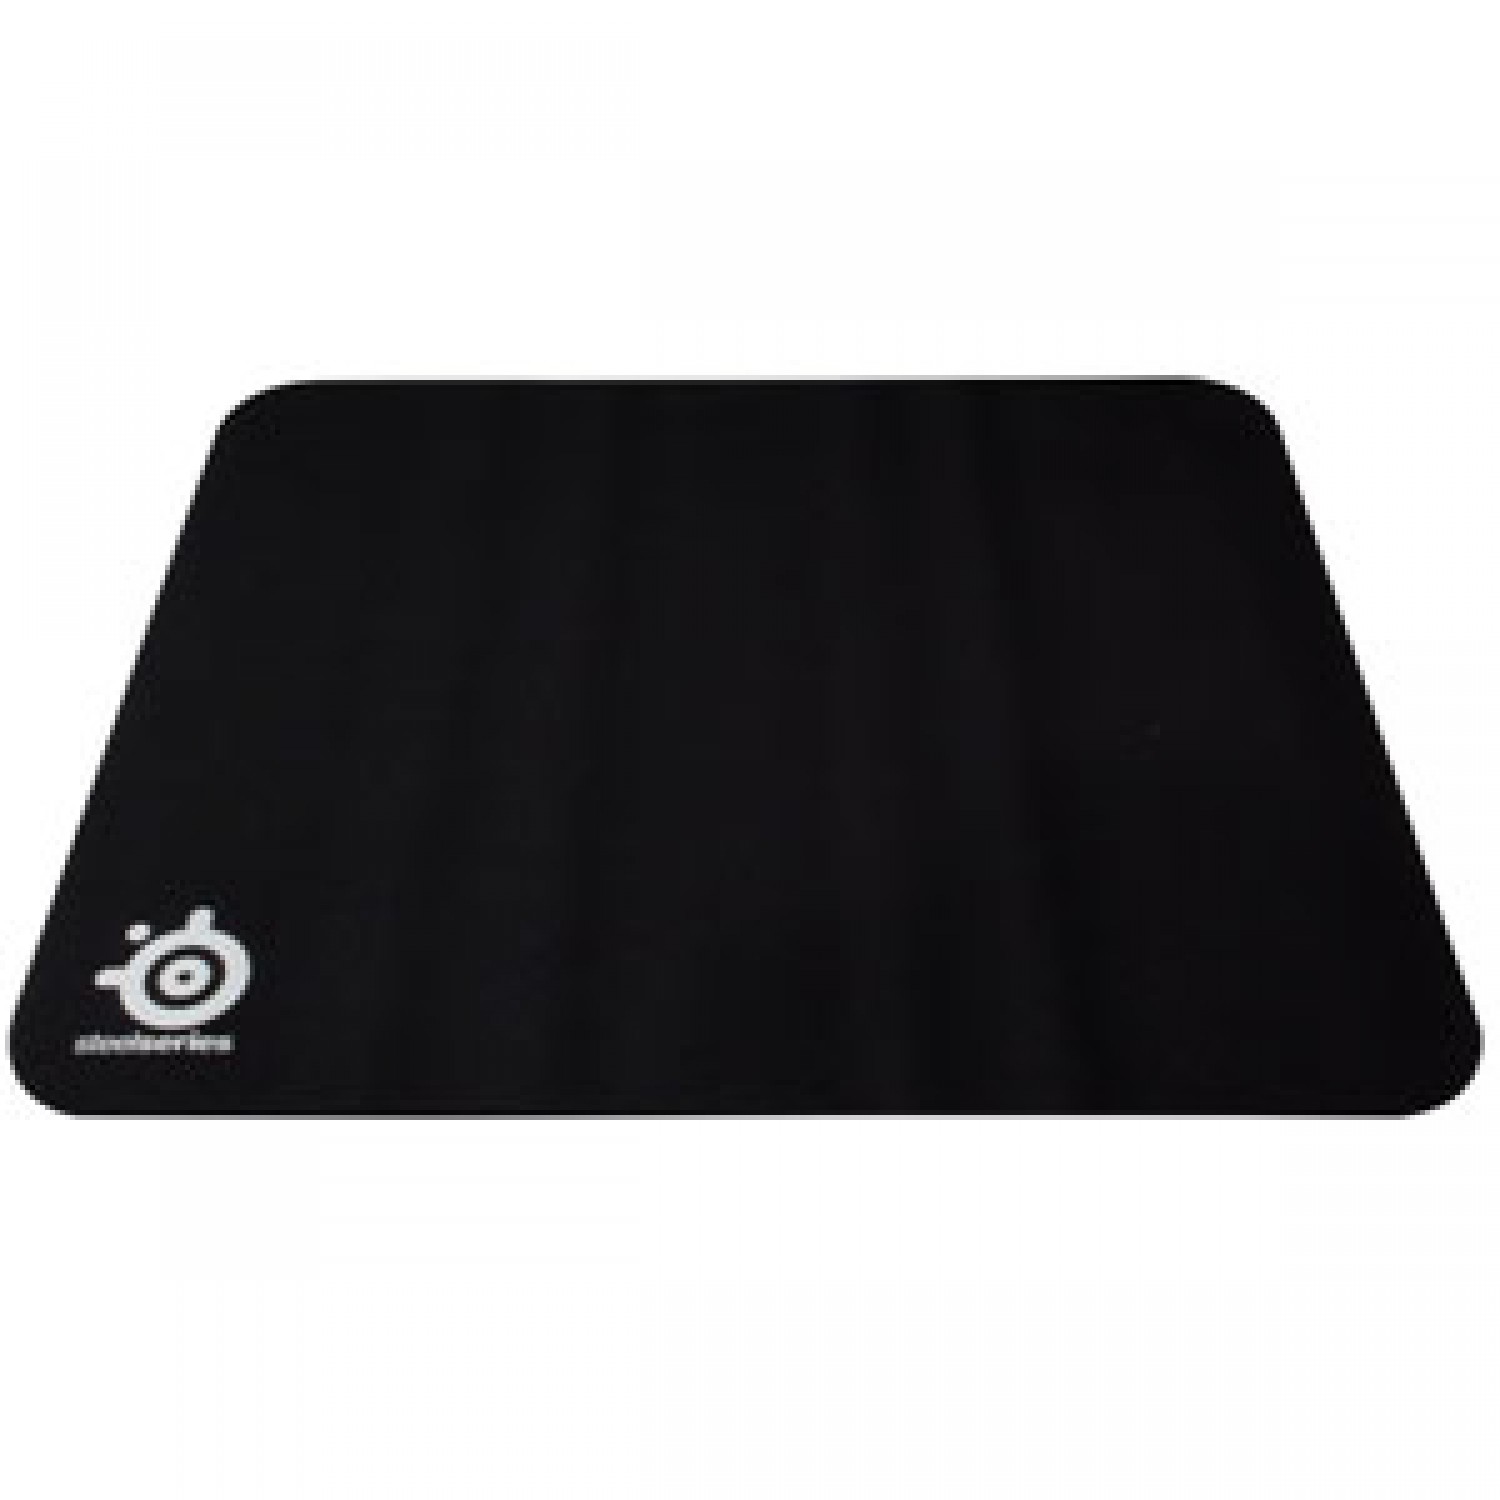 Steelseries Qck Mass Mouse pad